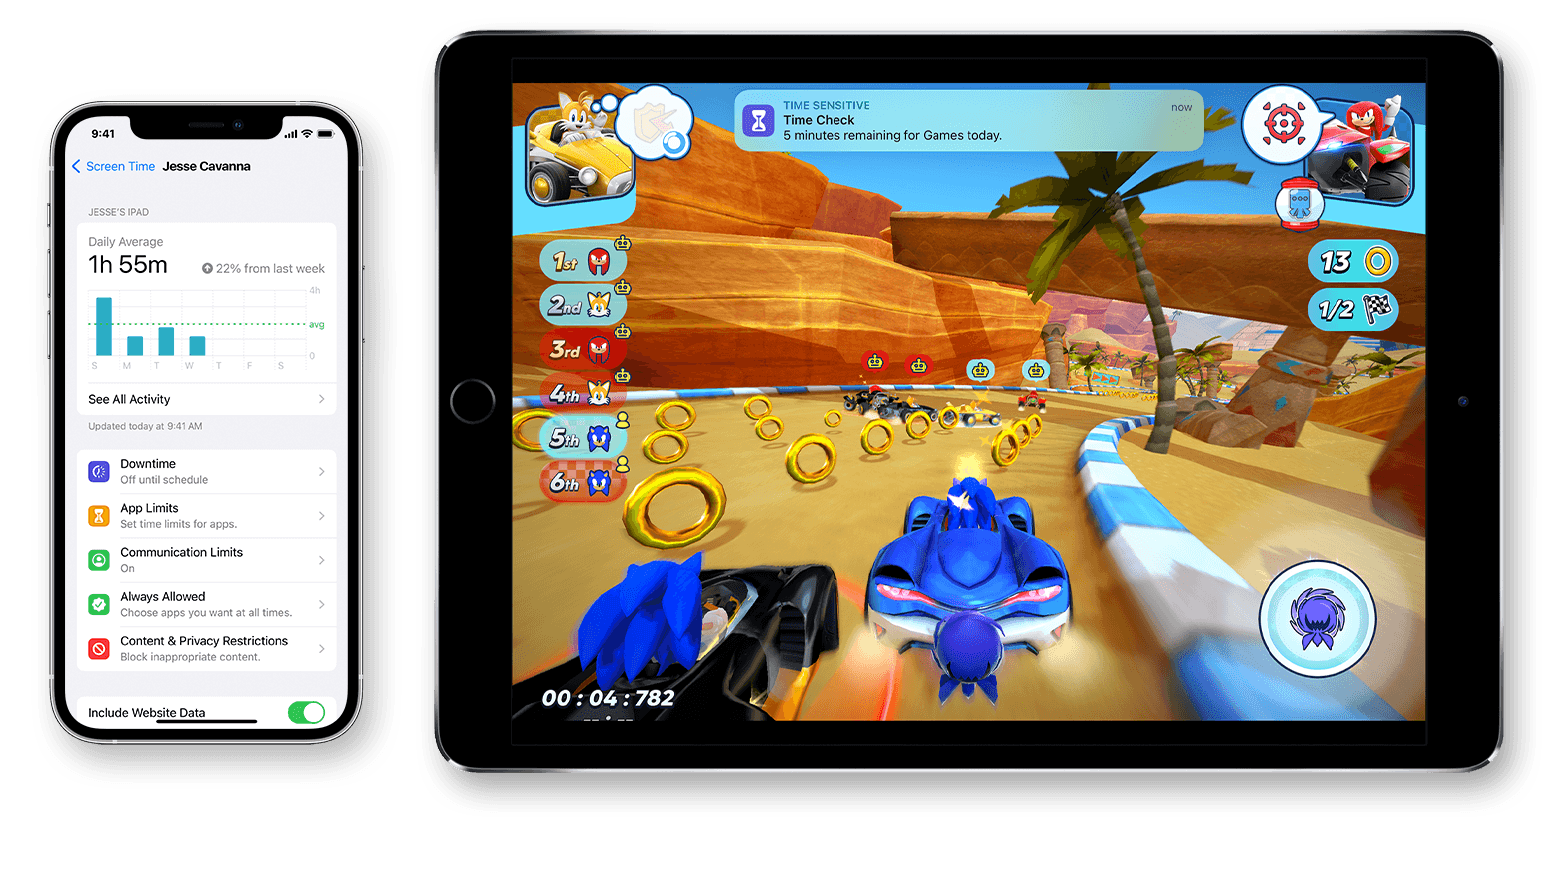 iPhone showing the daily average screen time, and iPad showing a racing game.